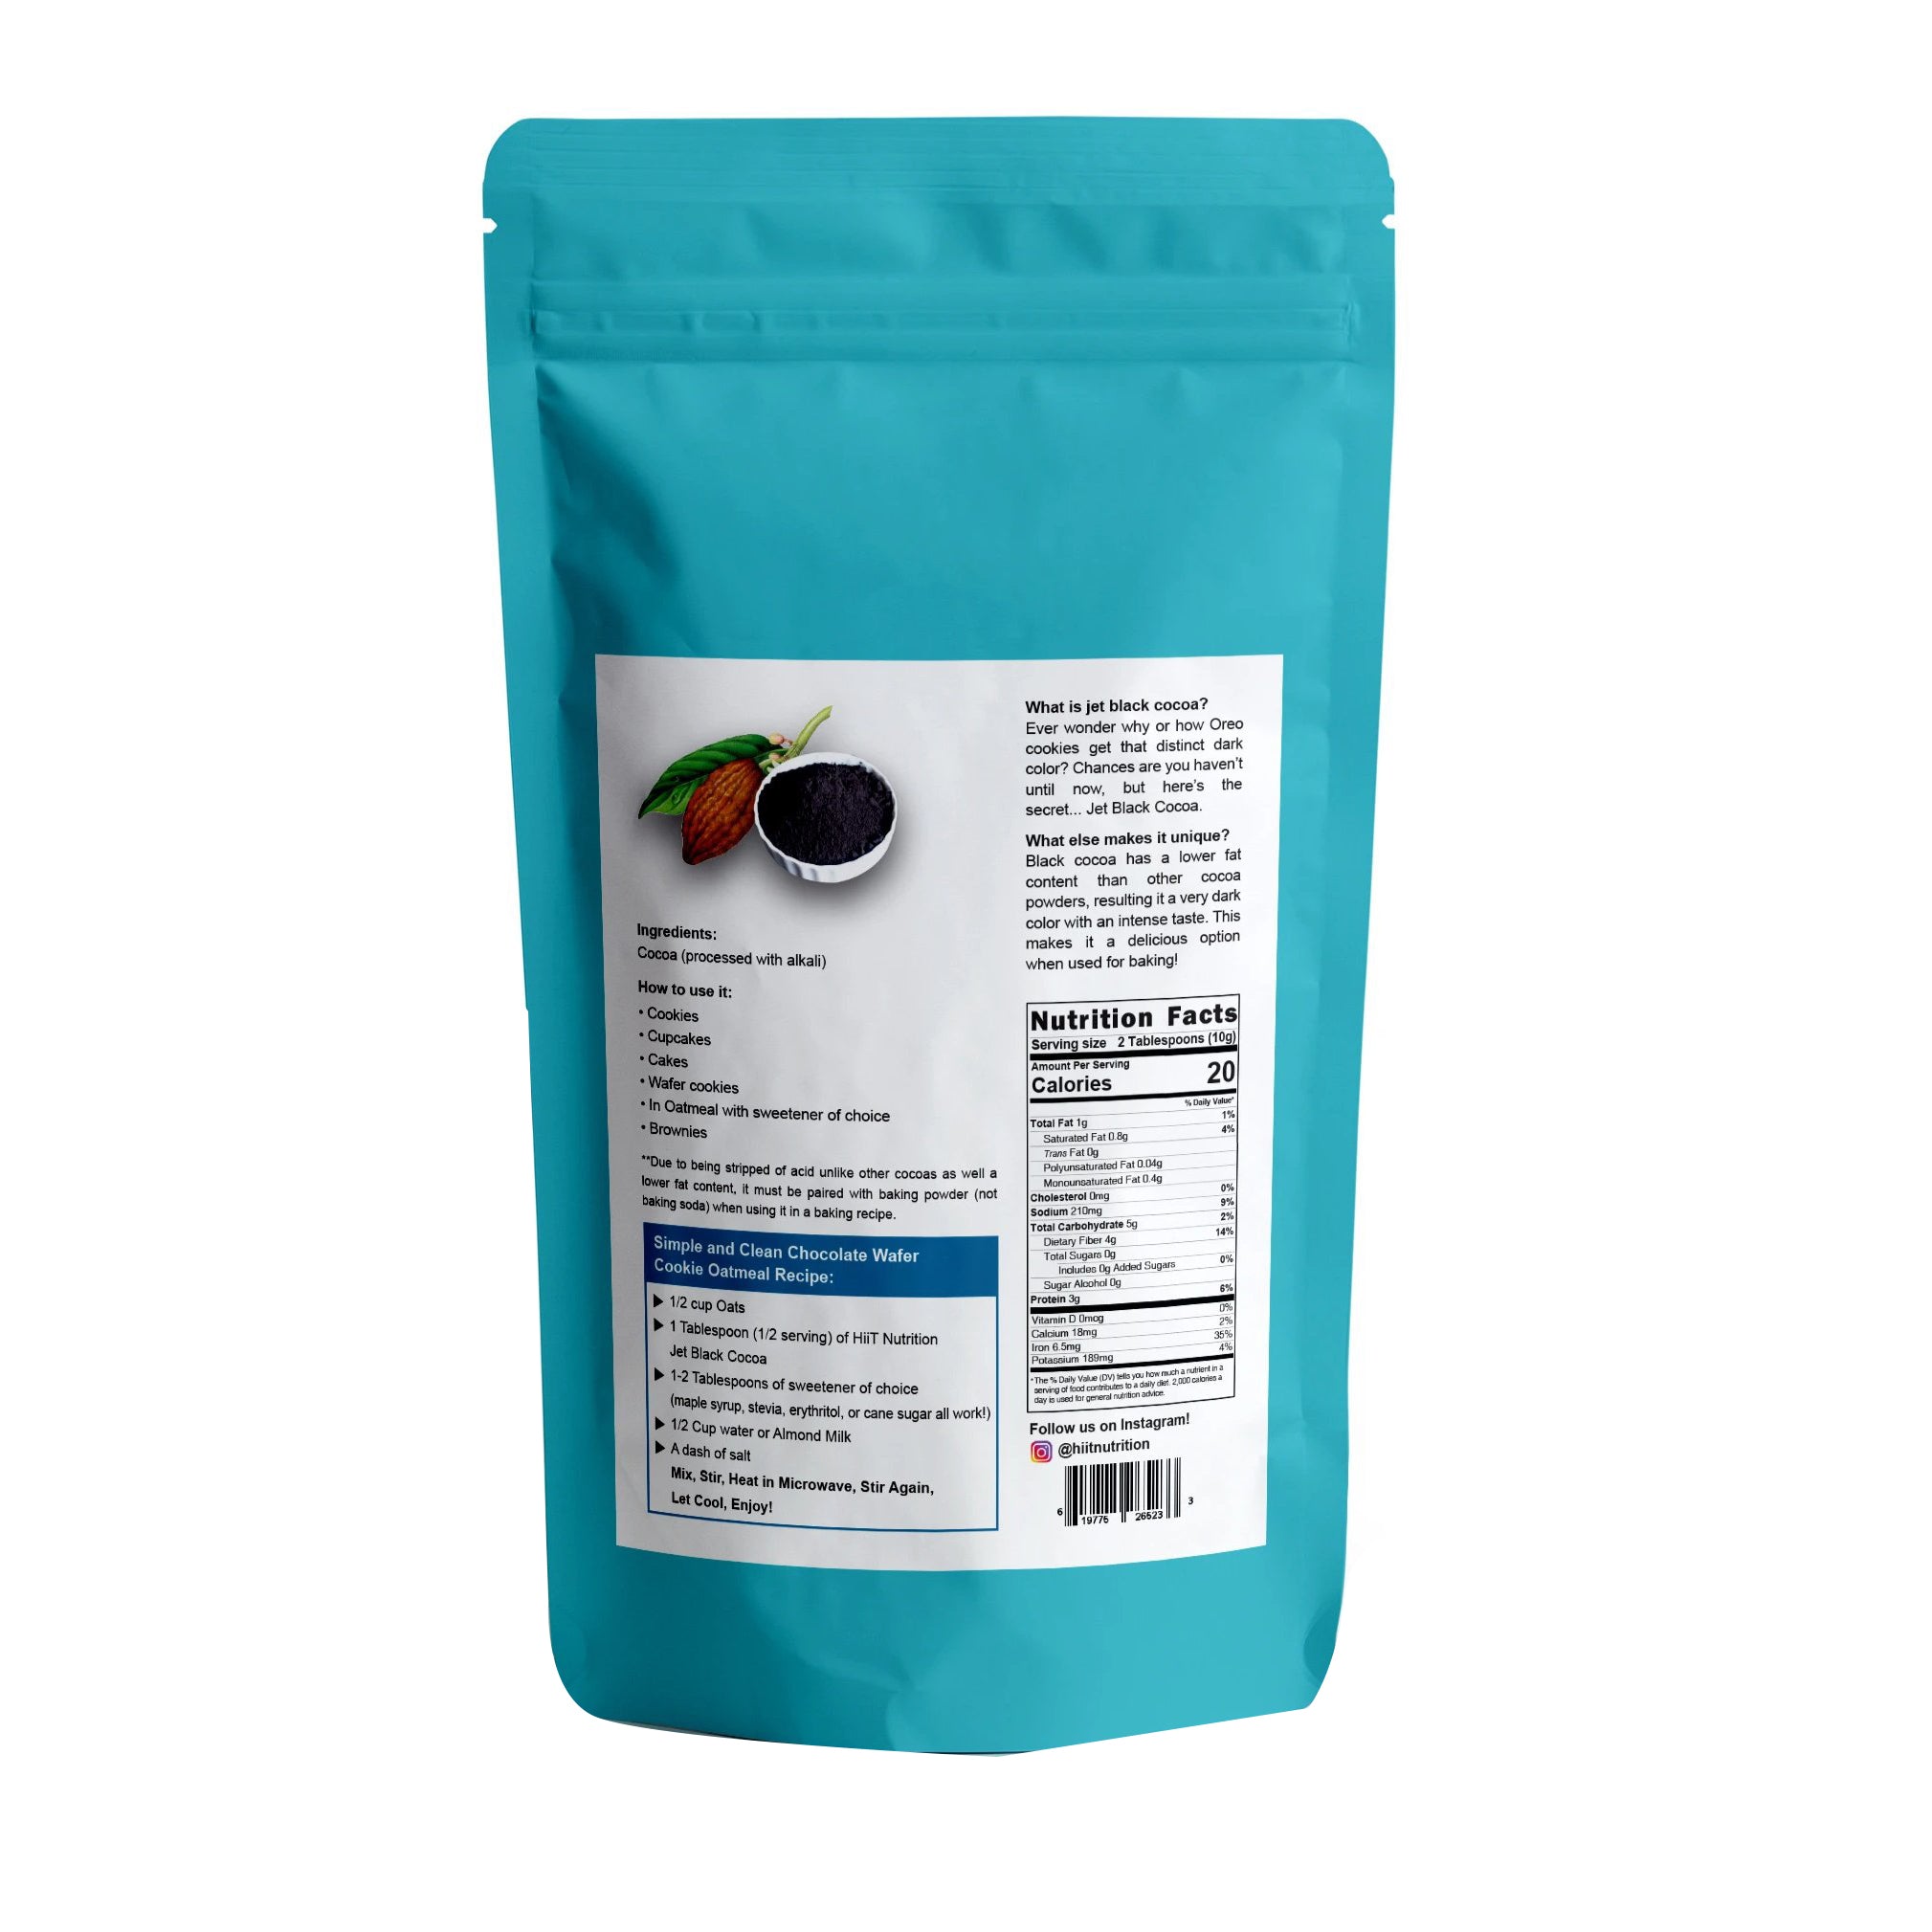 Black cocoa powder. Have you ever used - Tastes of Lizzy T